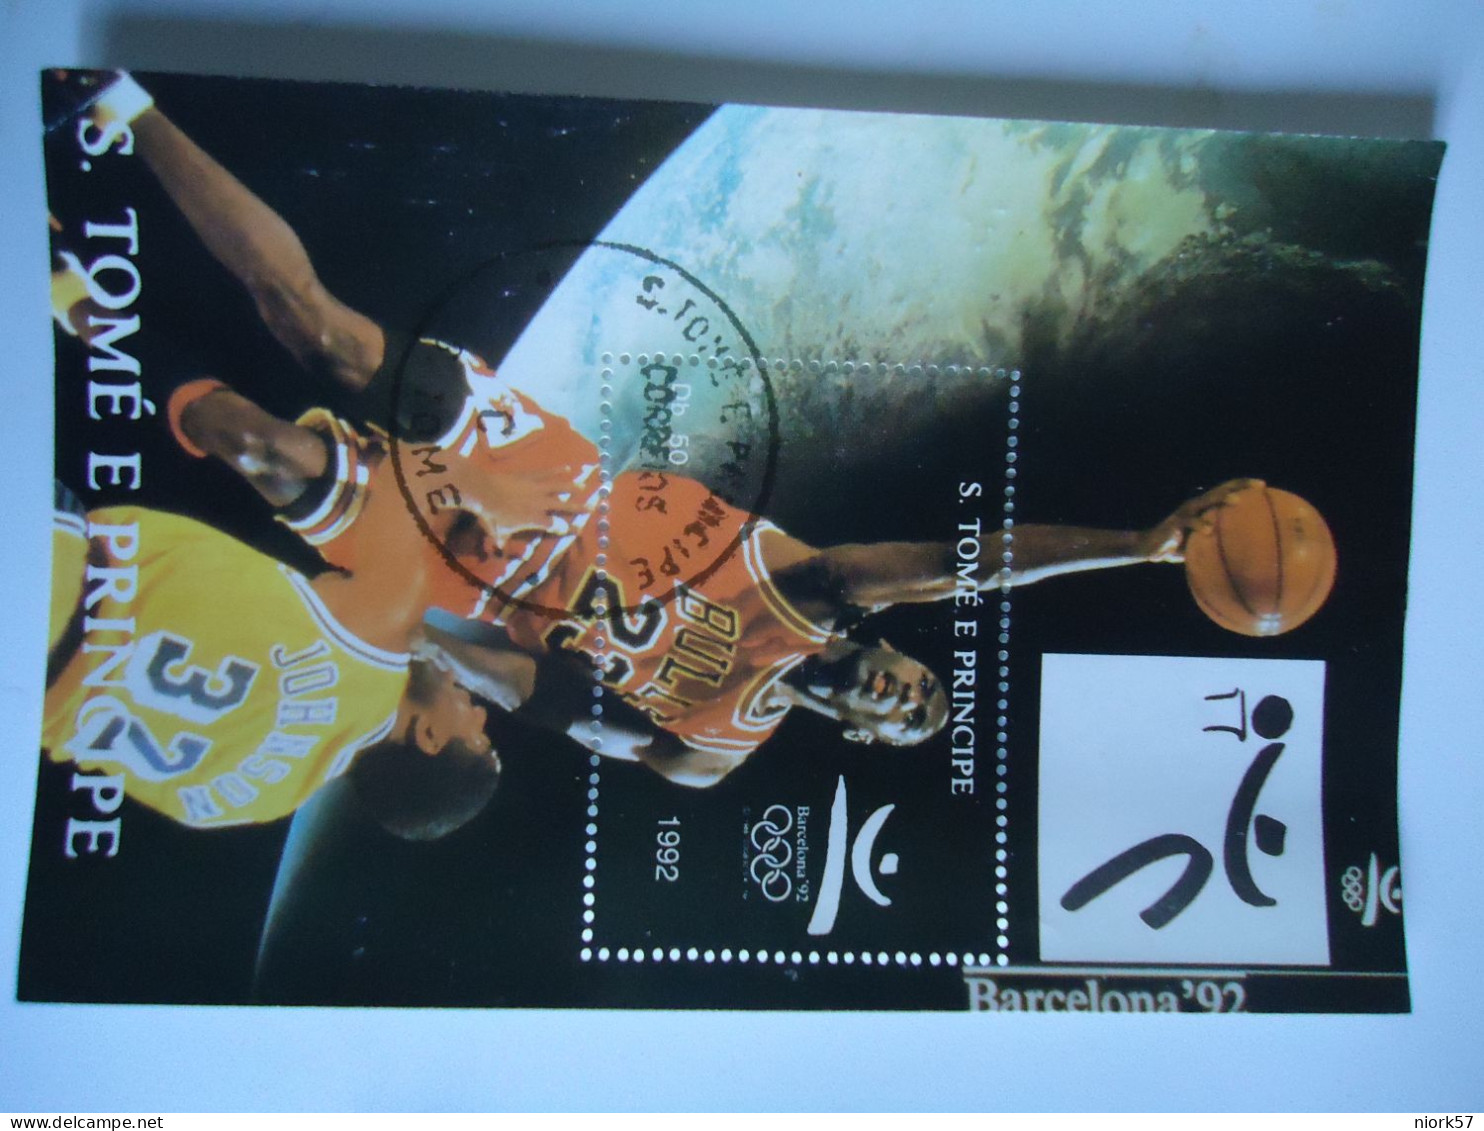 S.TOME E PRINCIPE  USED SHEET  OLYMPIC GAMES BARCELONA 92 BASKETBALL - Sommer 1992: Barcelone